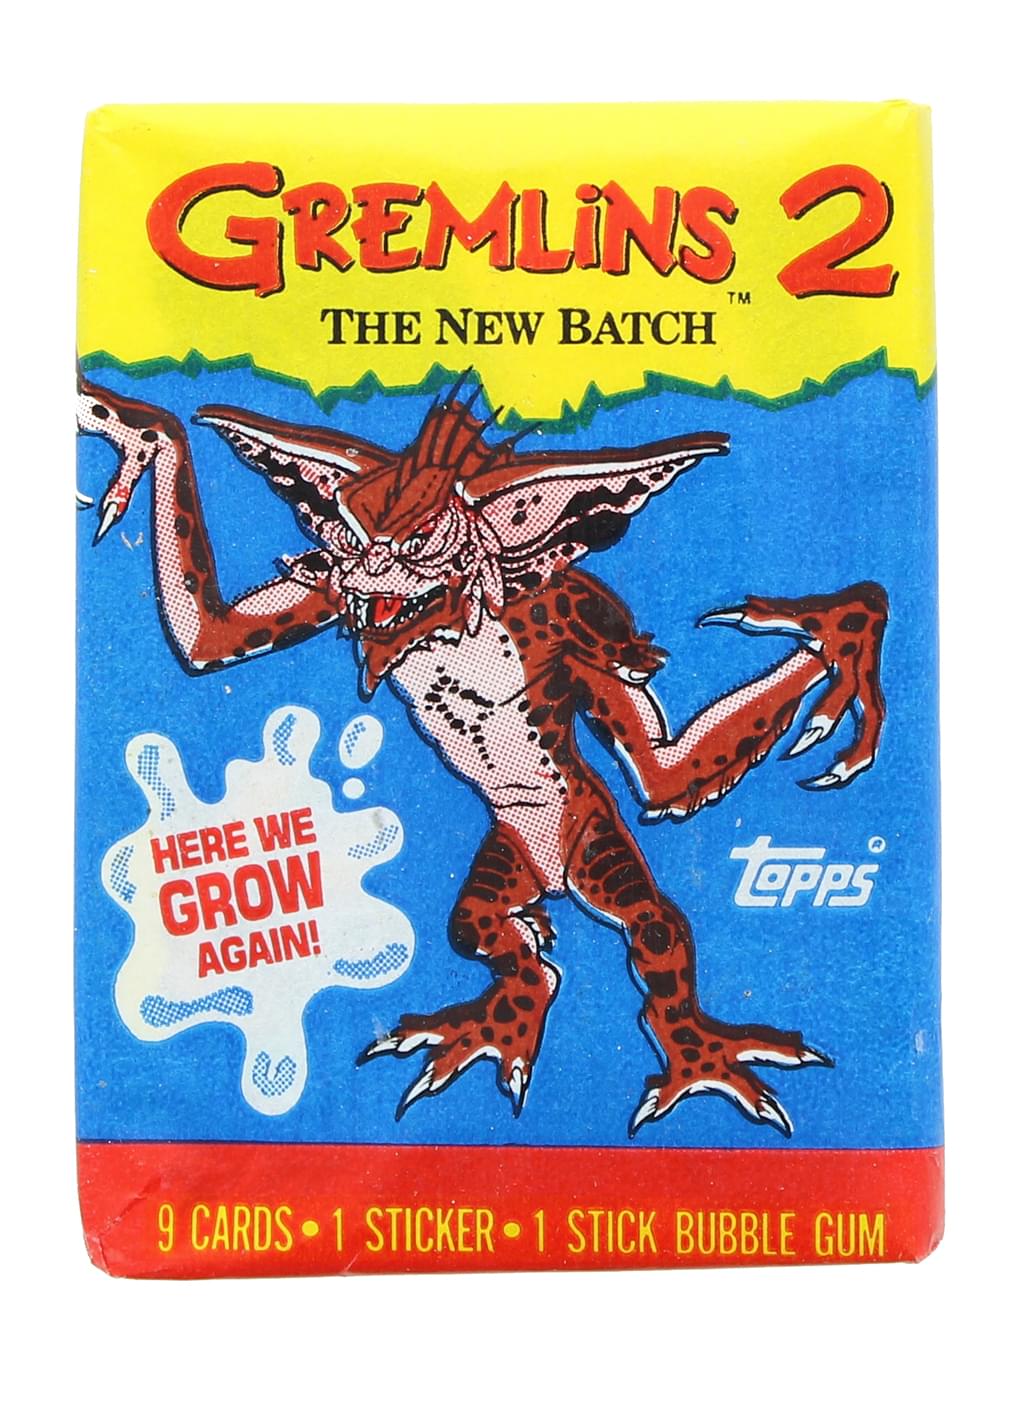 Gremlins 2 The New Batch Topps Trading Cards - 1 Pack